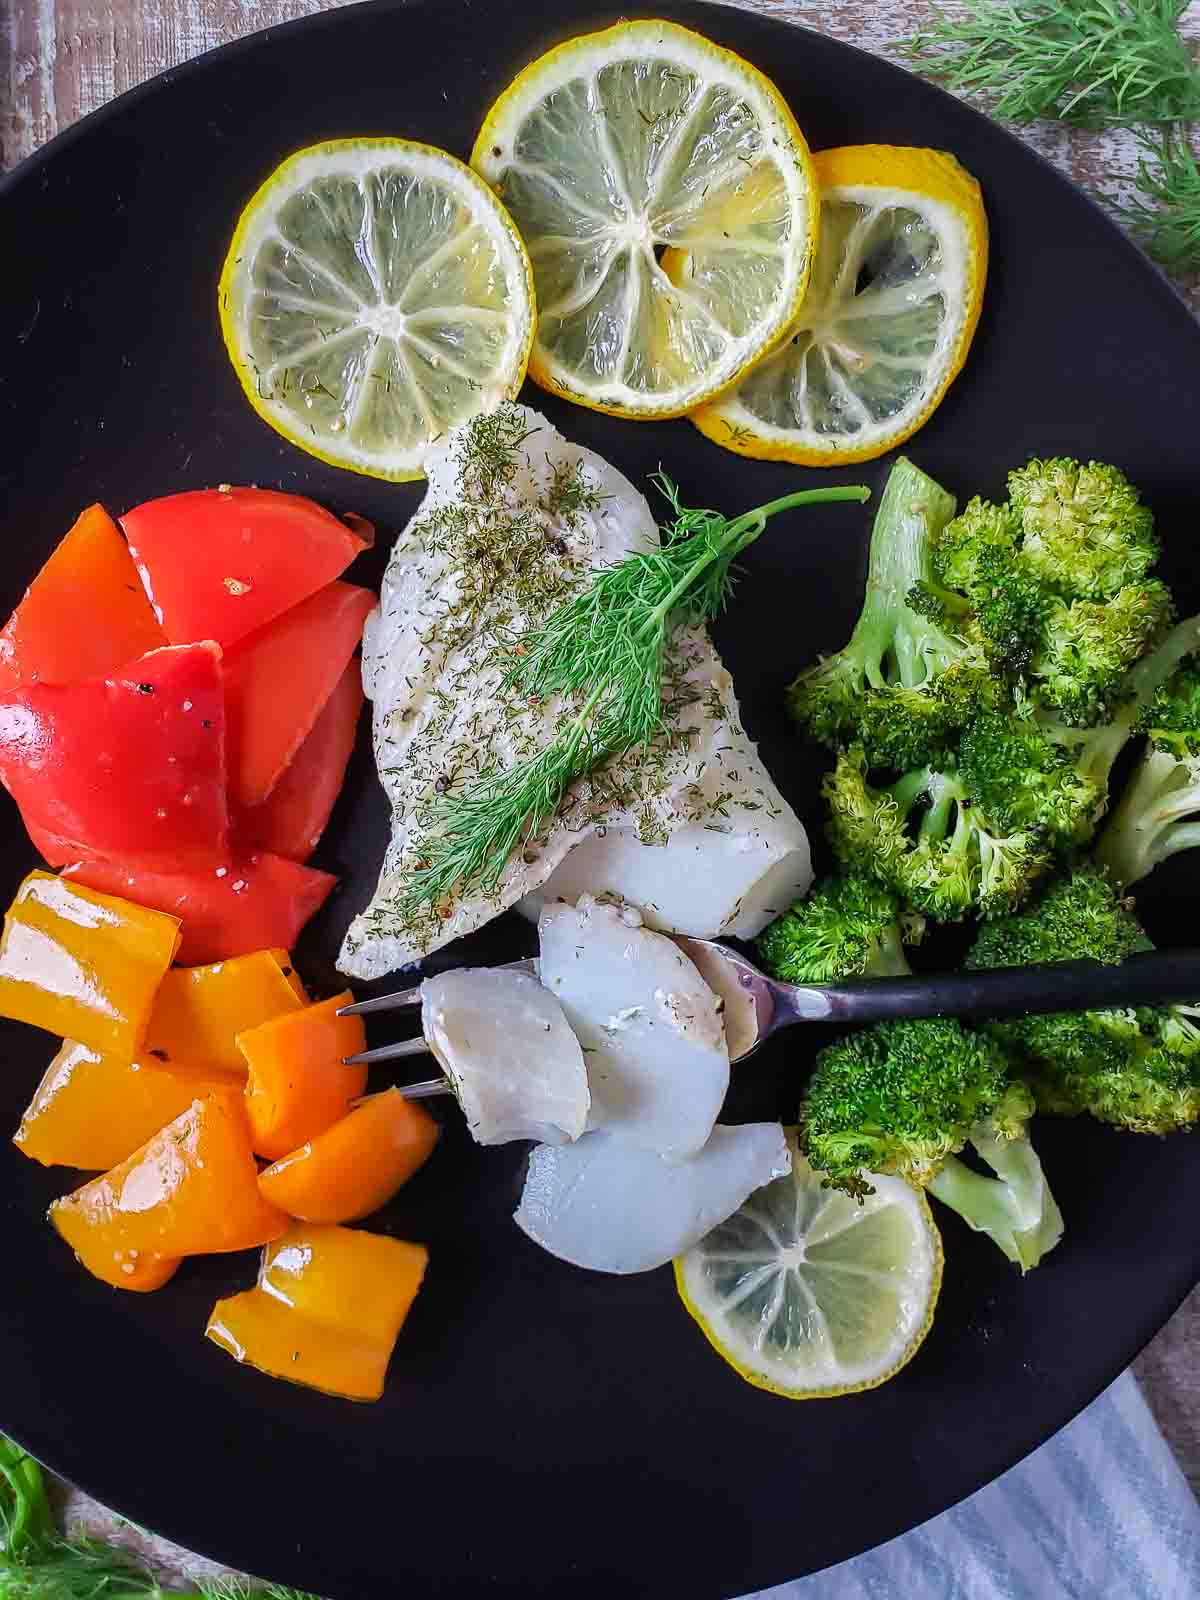 Portion of cooked cod, veggies and lemon slices on a plate.